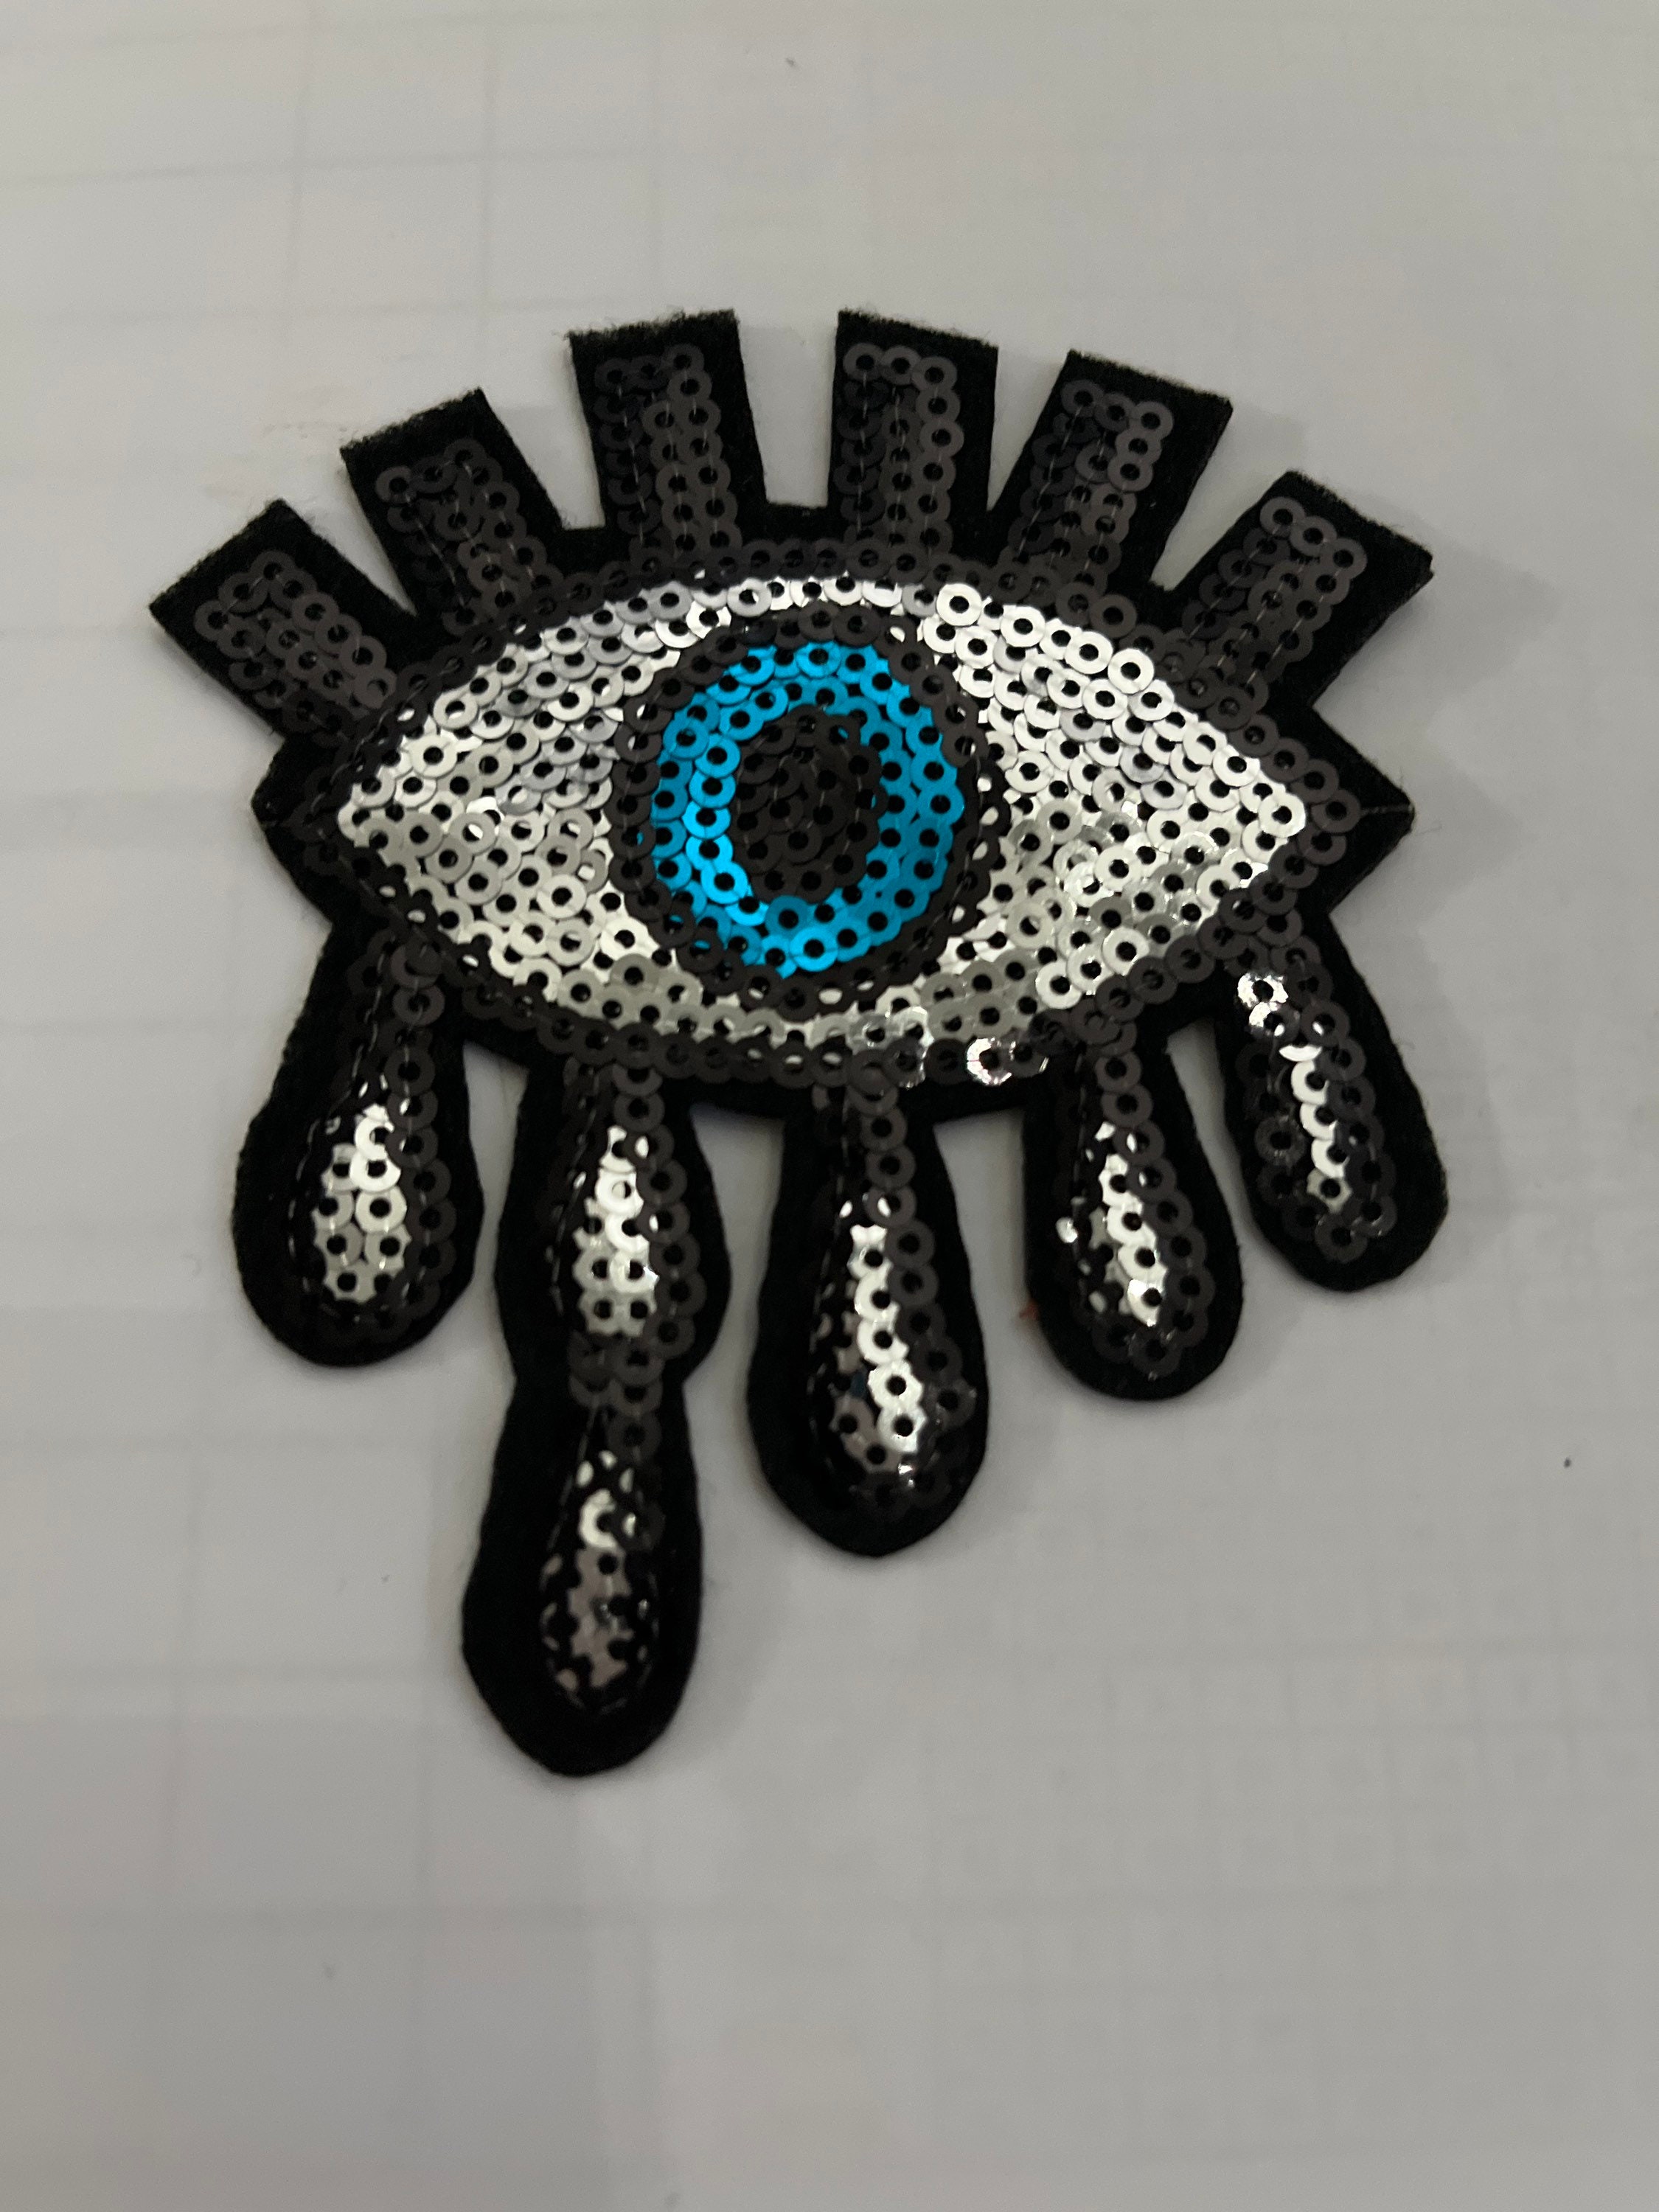 Evil Eye Sequined Patch Embroidery Hole Cloth Patch Clothing Denim  Decorative Middle East Fashion Applique